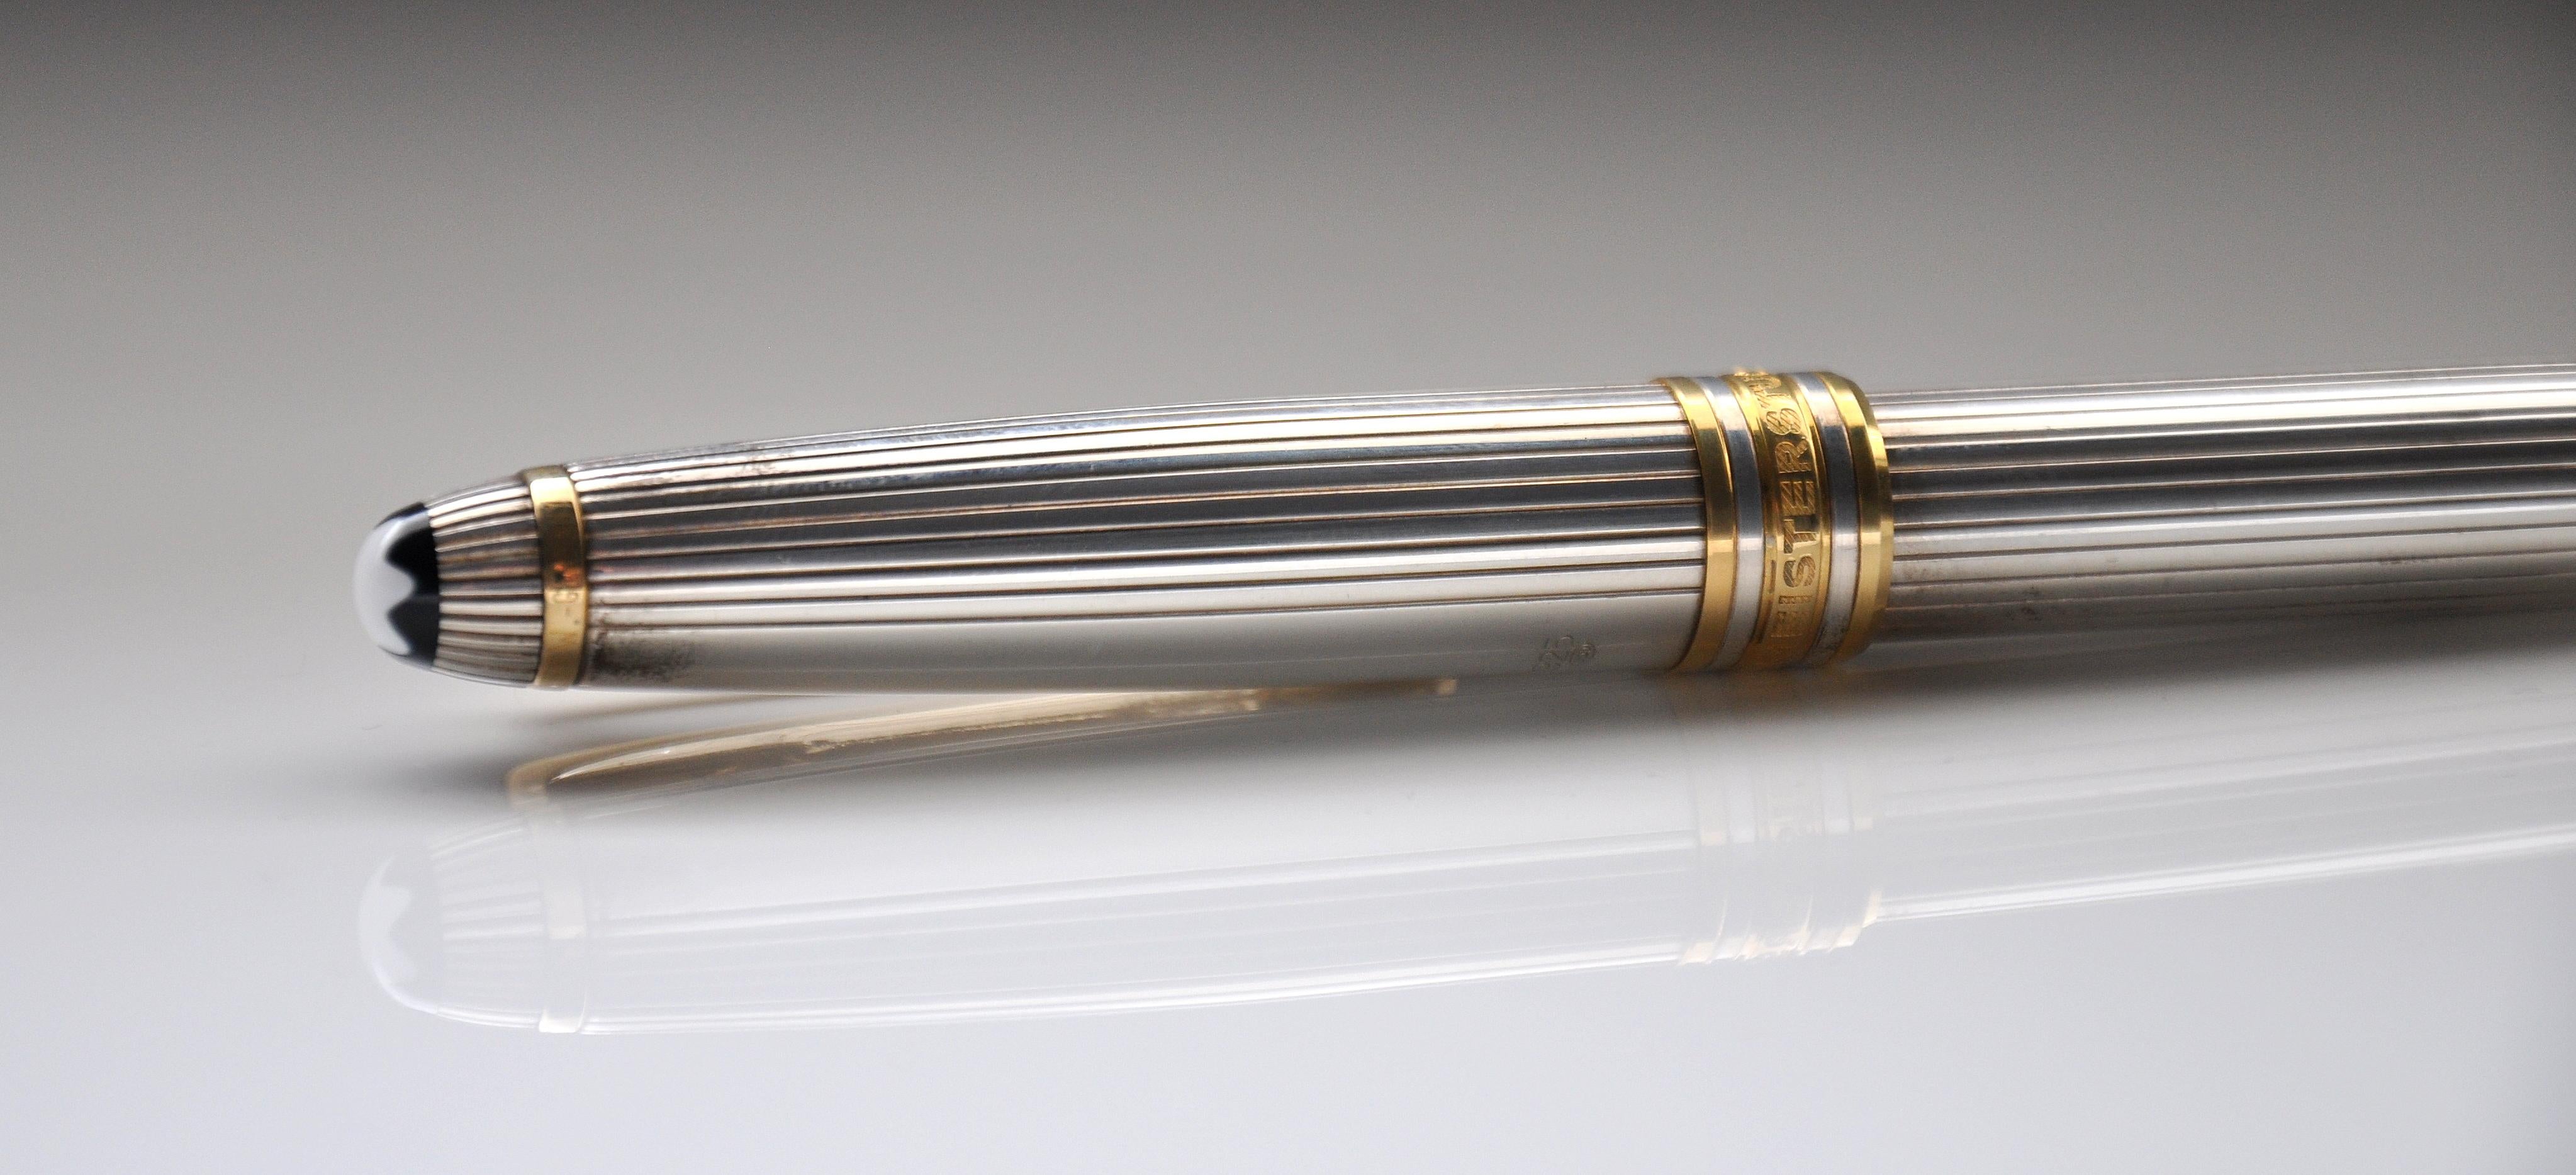 A vintage 925 silver Montblanc Meisterstück 165 mechanical pencil, in the Godron pattern. The pencil has a mechanical twist mechanism with 0.7 mm lead. The barrel and cap of this pencil are made of 925 sterling silver and feature a fluted or